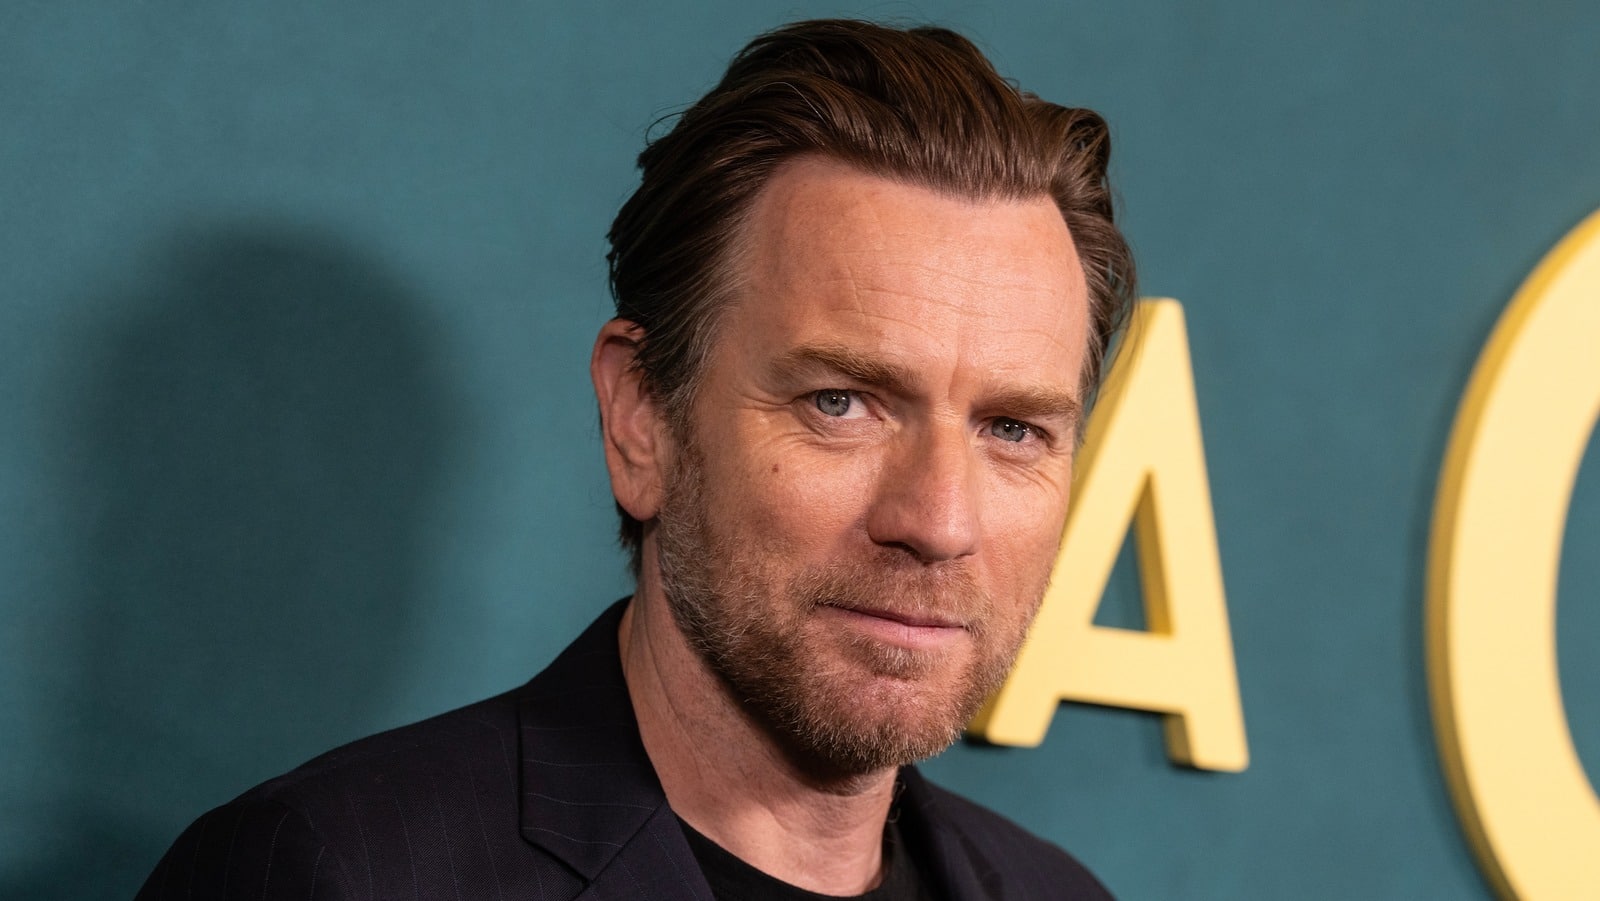 Ewan McGregor Refuses To Wear One Thing In His Movies & TV Shows 30